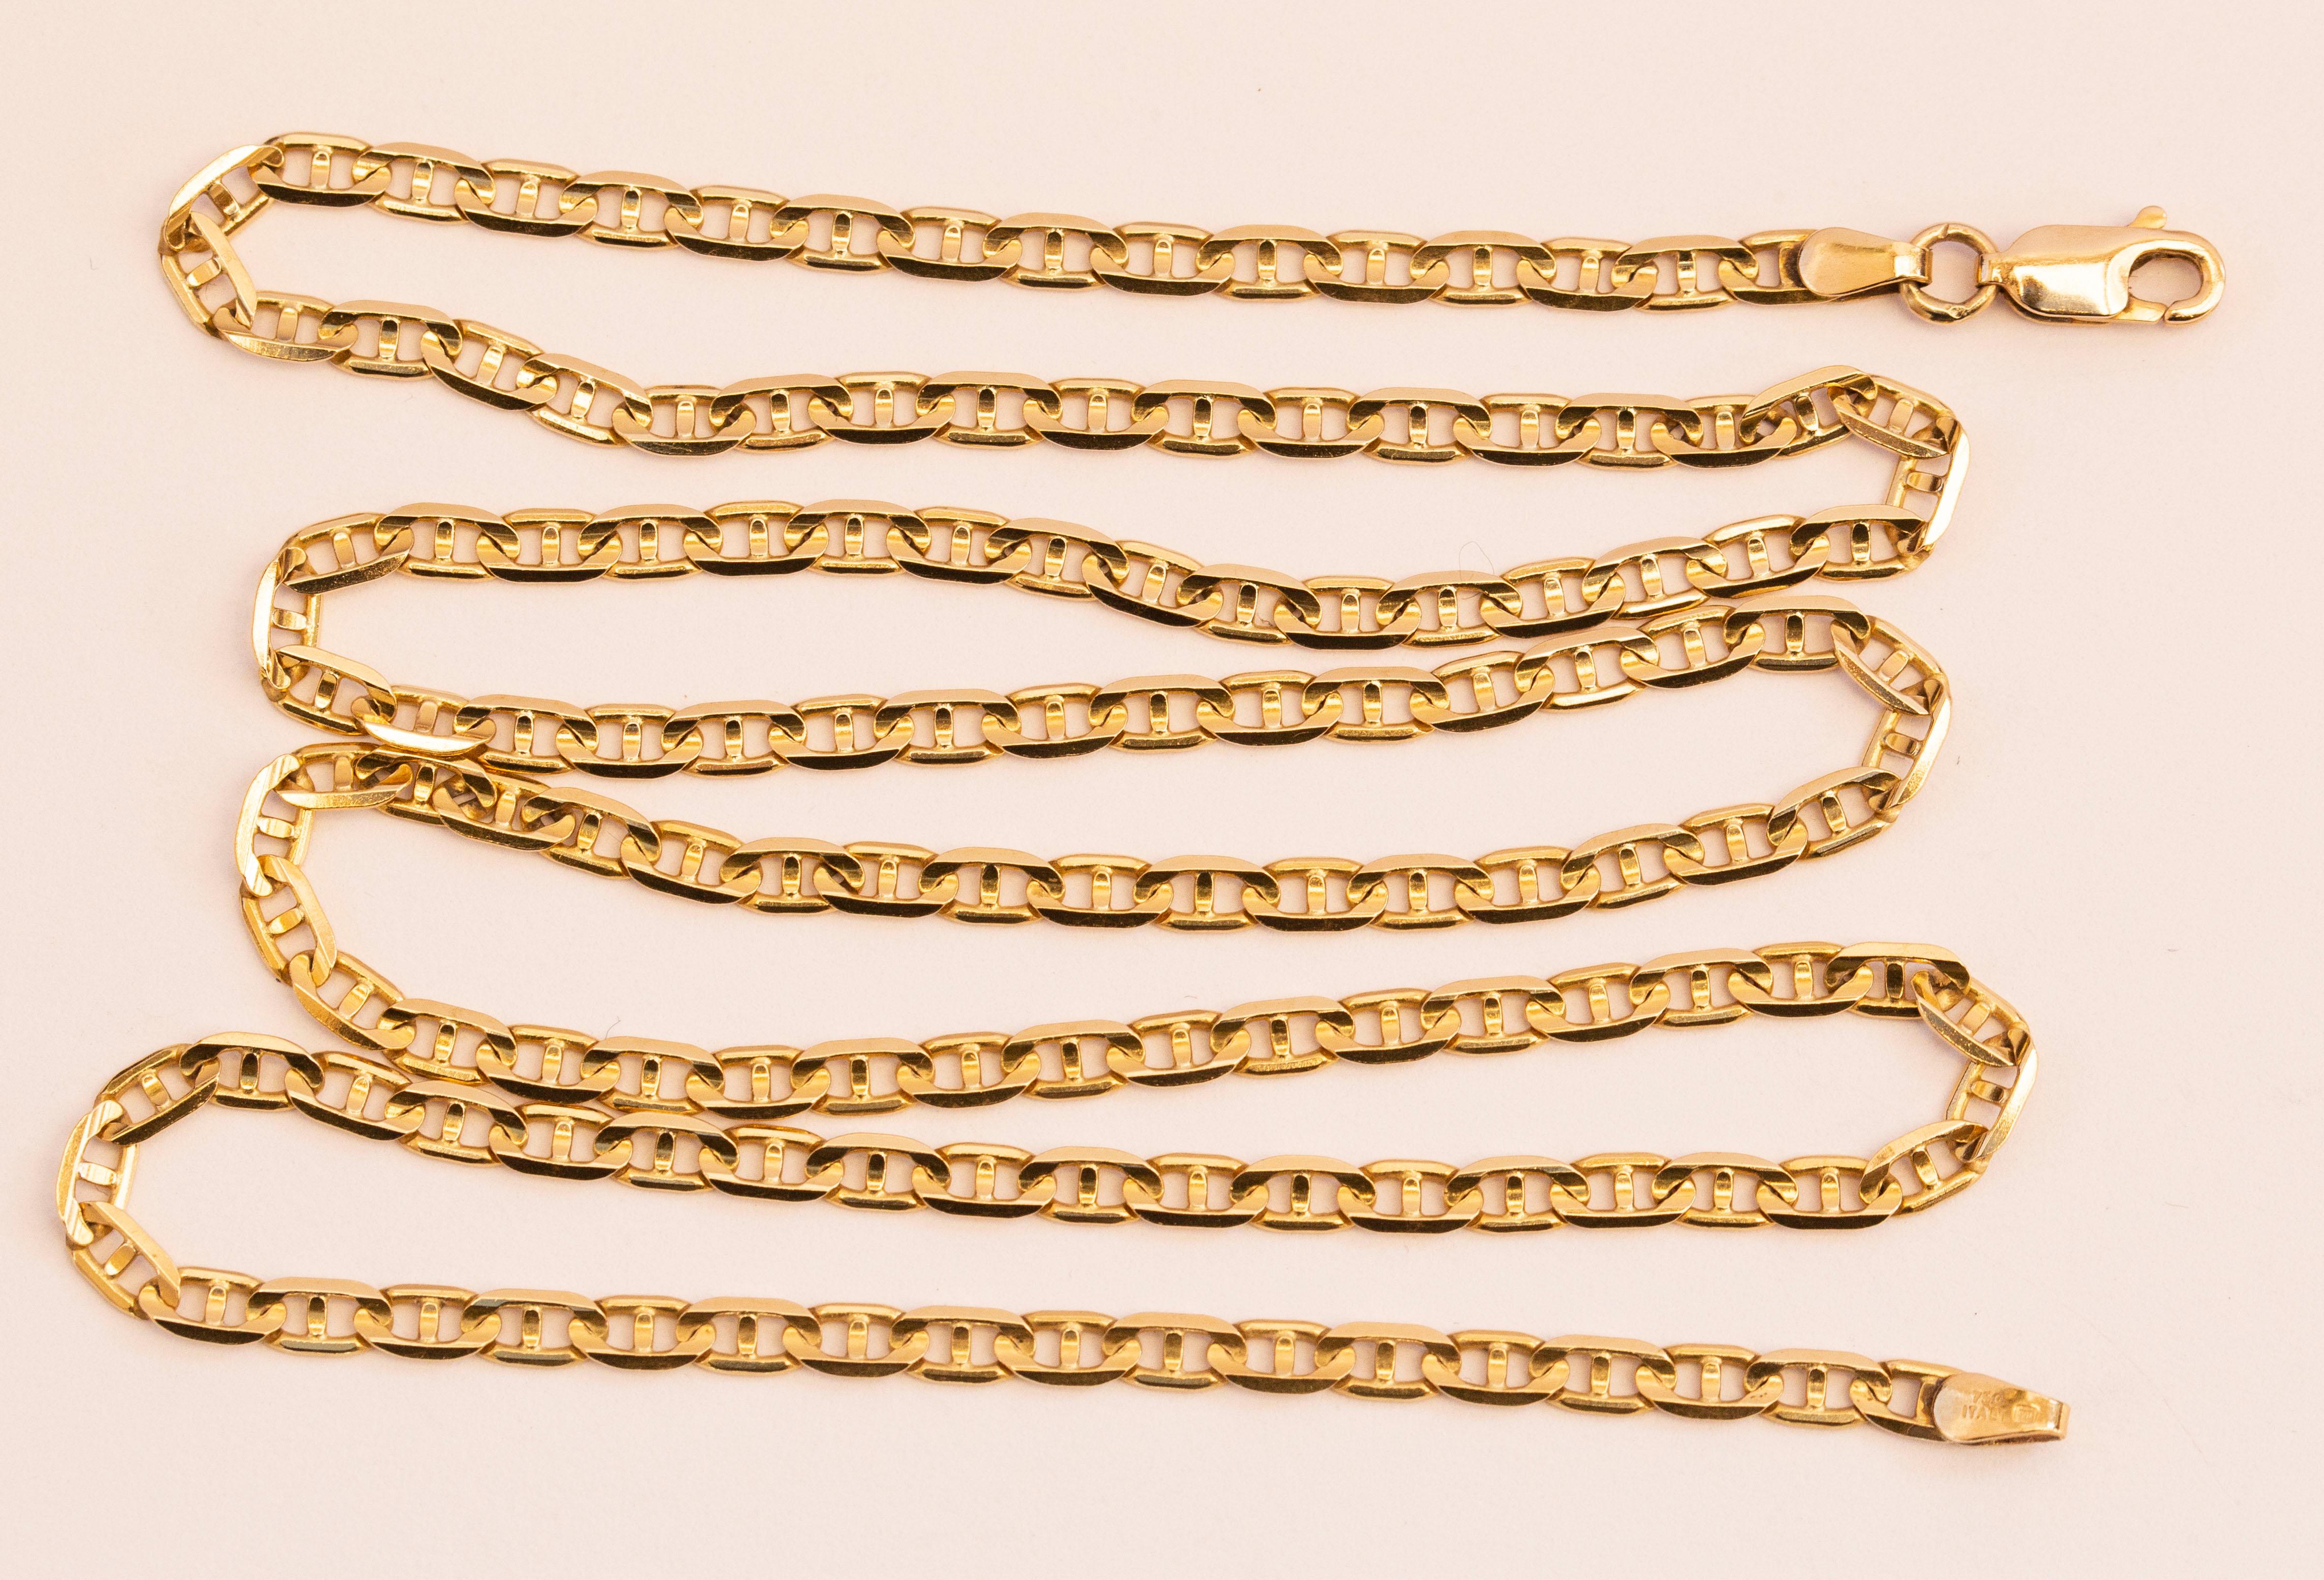 A vintage Italian 18 karat yellow gold link chain necklace (type flat mariner/anchor). The necklace is beautifully made and it will be a gorgeous addition to a classy as well as a modern outfit. The necklace is stamped with 750 Italy that stands for